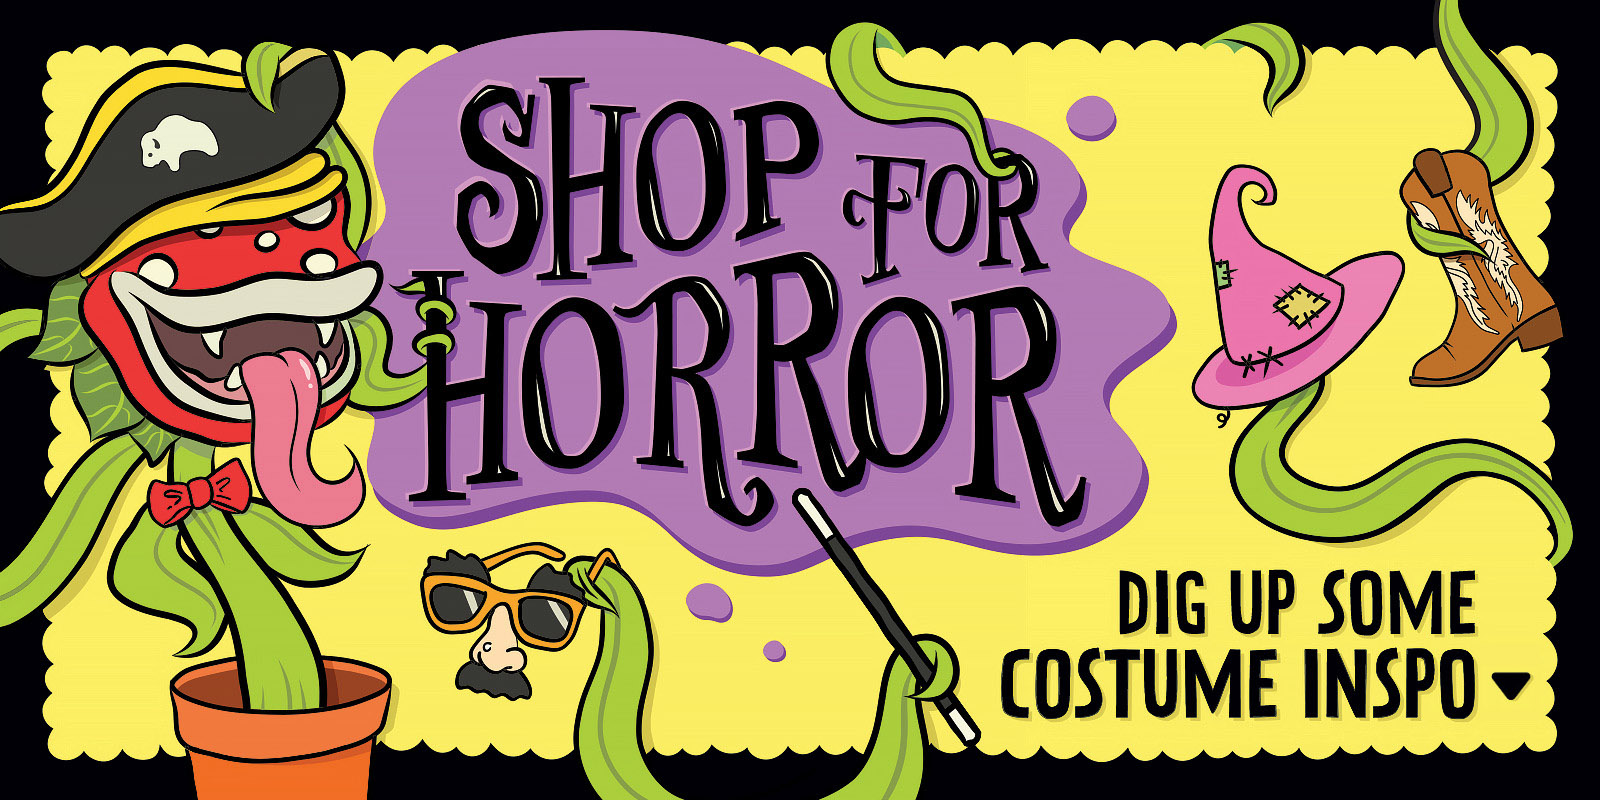 SHOP FOR HORROR: Dig up some Costume Inspo » [Illustration of a potted Carnivorous Plant trying on costume accessories!]